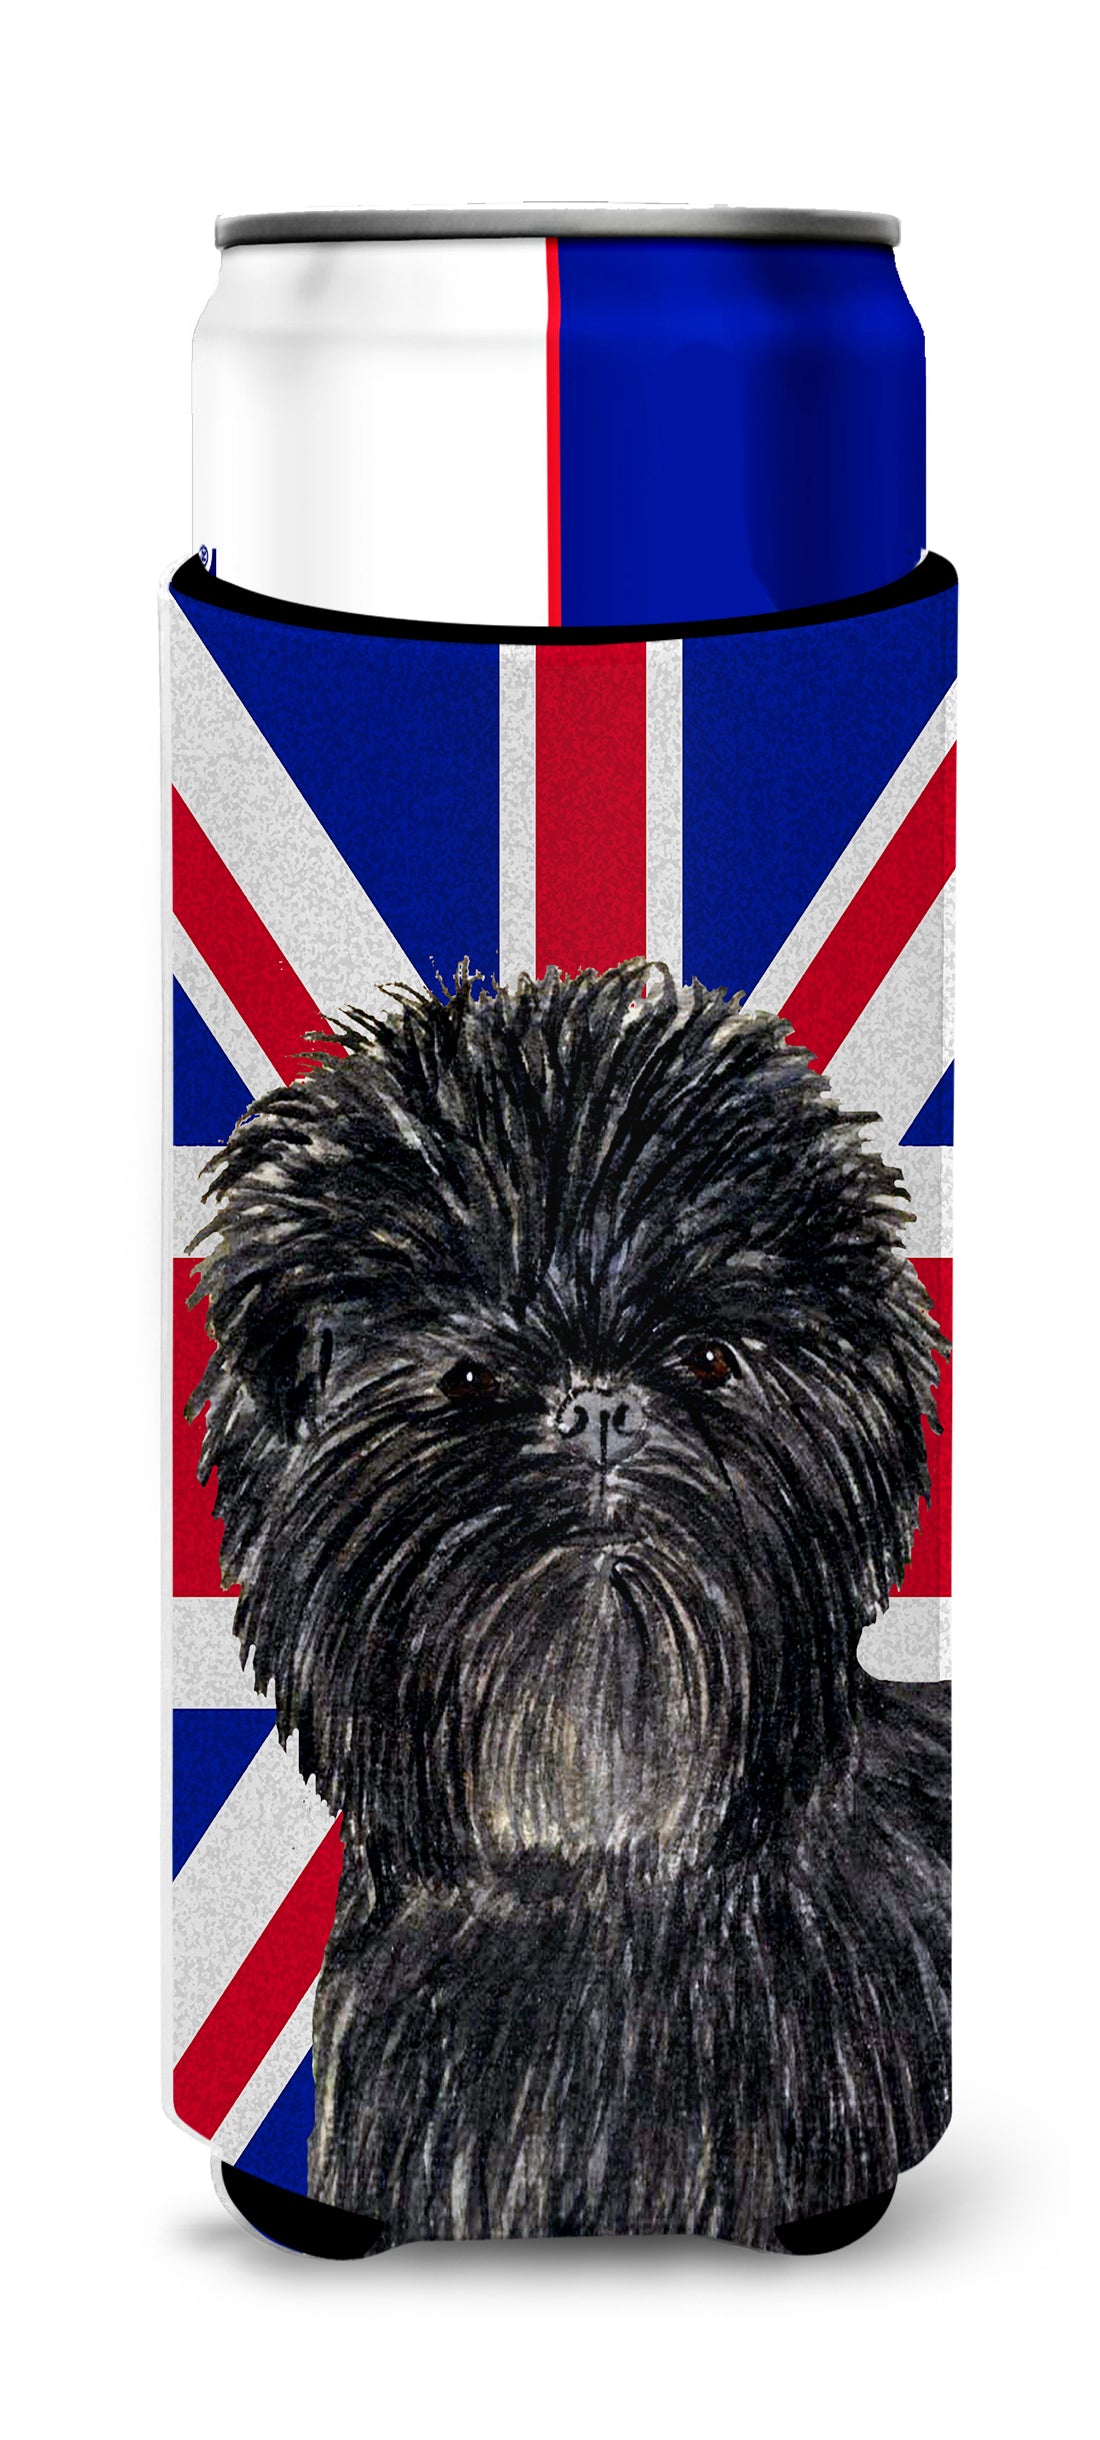 Affenpinscher with English Union Jack British Flag Ultra Beverage Insulators for slim cans SS4953MUK